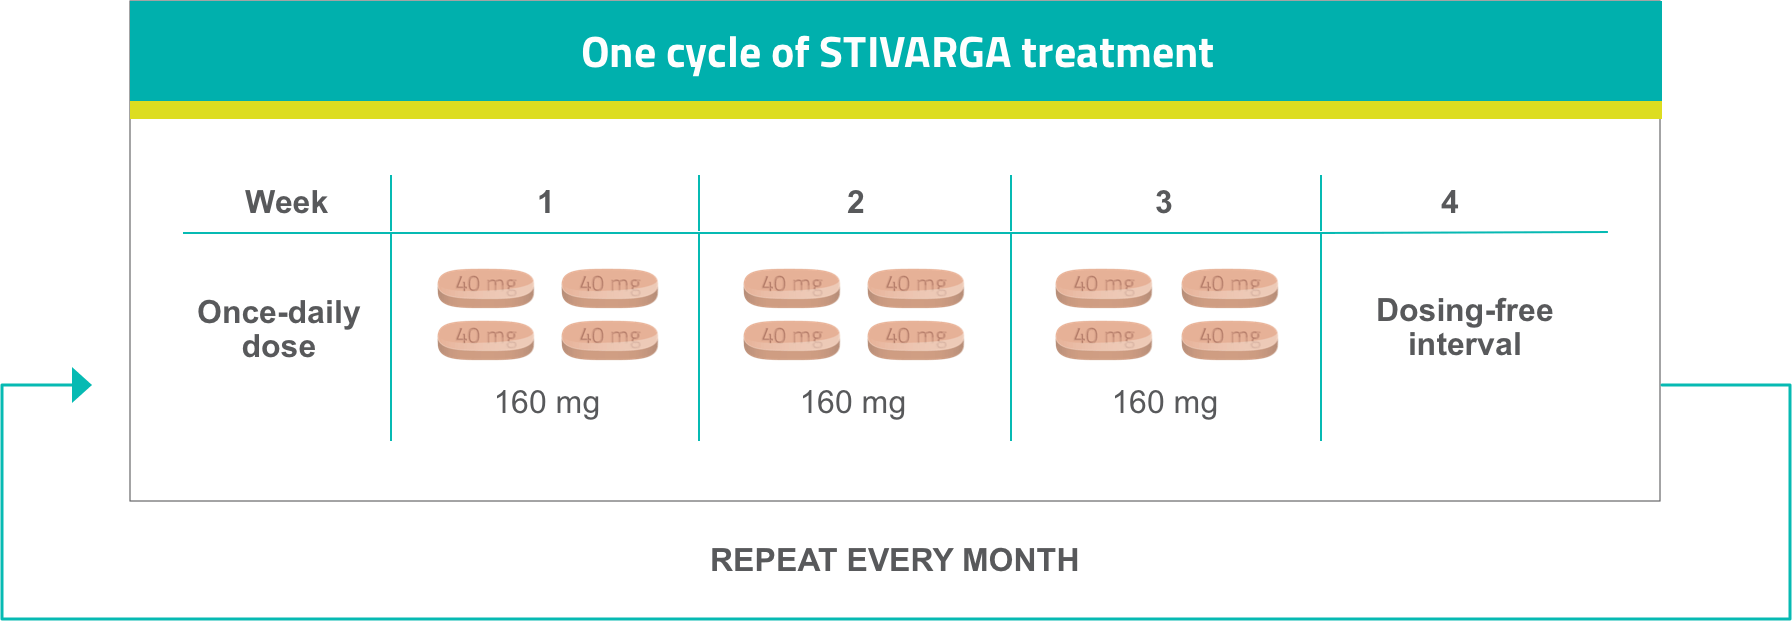 Table on one cycle of STIVARGA® (regorafenib) treatment. Once-daily dose of 160 mg (4 tablets) for 3 weeks, followed by dosing-free interval.